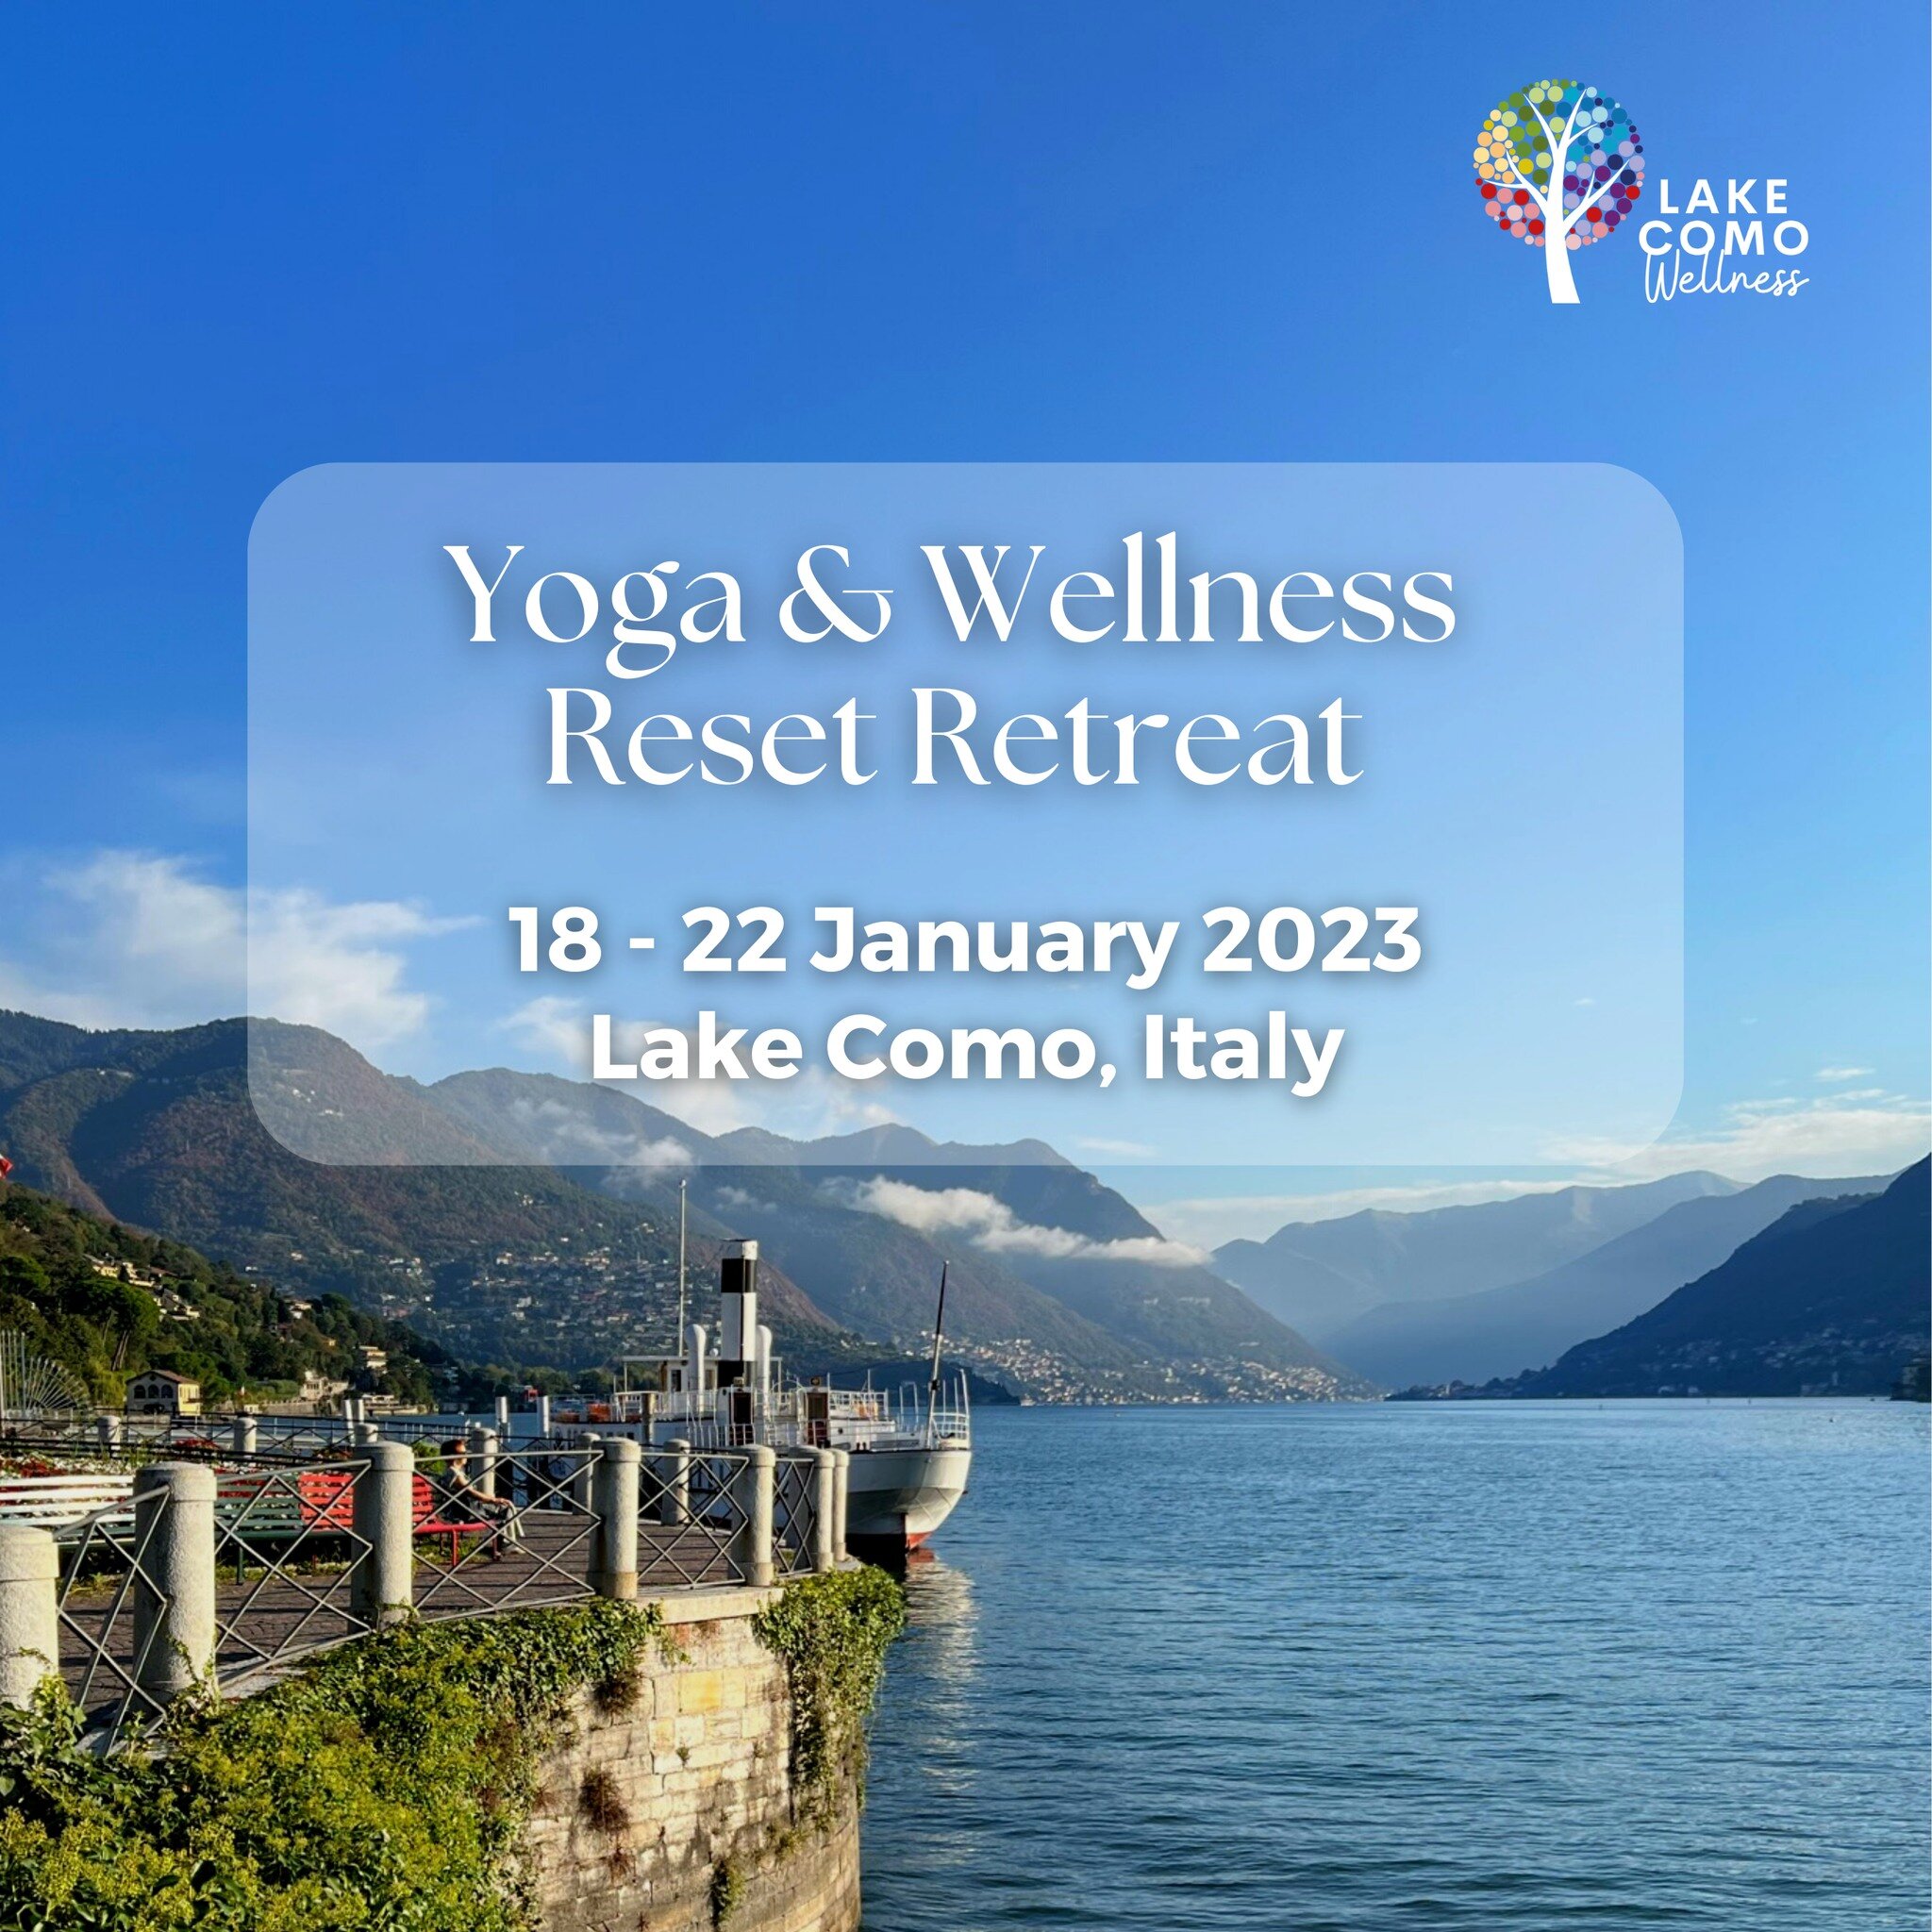 Lake Como Wellness Reset Retreat ✨
 
📆 18 - 22 January 2023
📍 Cernobbio, Lake Como, Italy
 
🕊️ EARLY BIRD OFFER: &euro;300 discount if you book before 1st December!
 
🧘 Join us for a 4-day wellness experience to reconnect your mind, body and soul